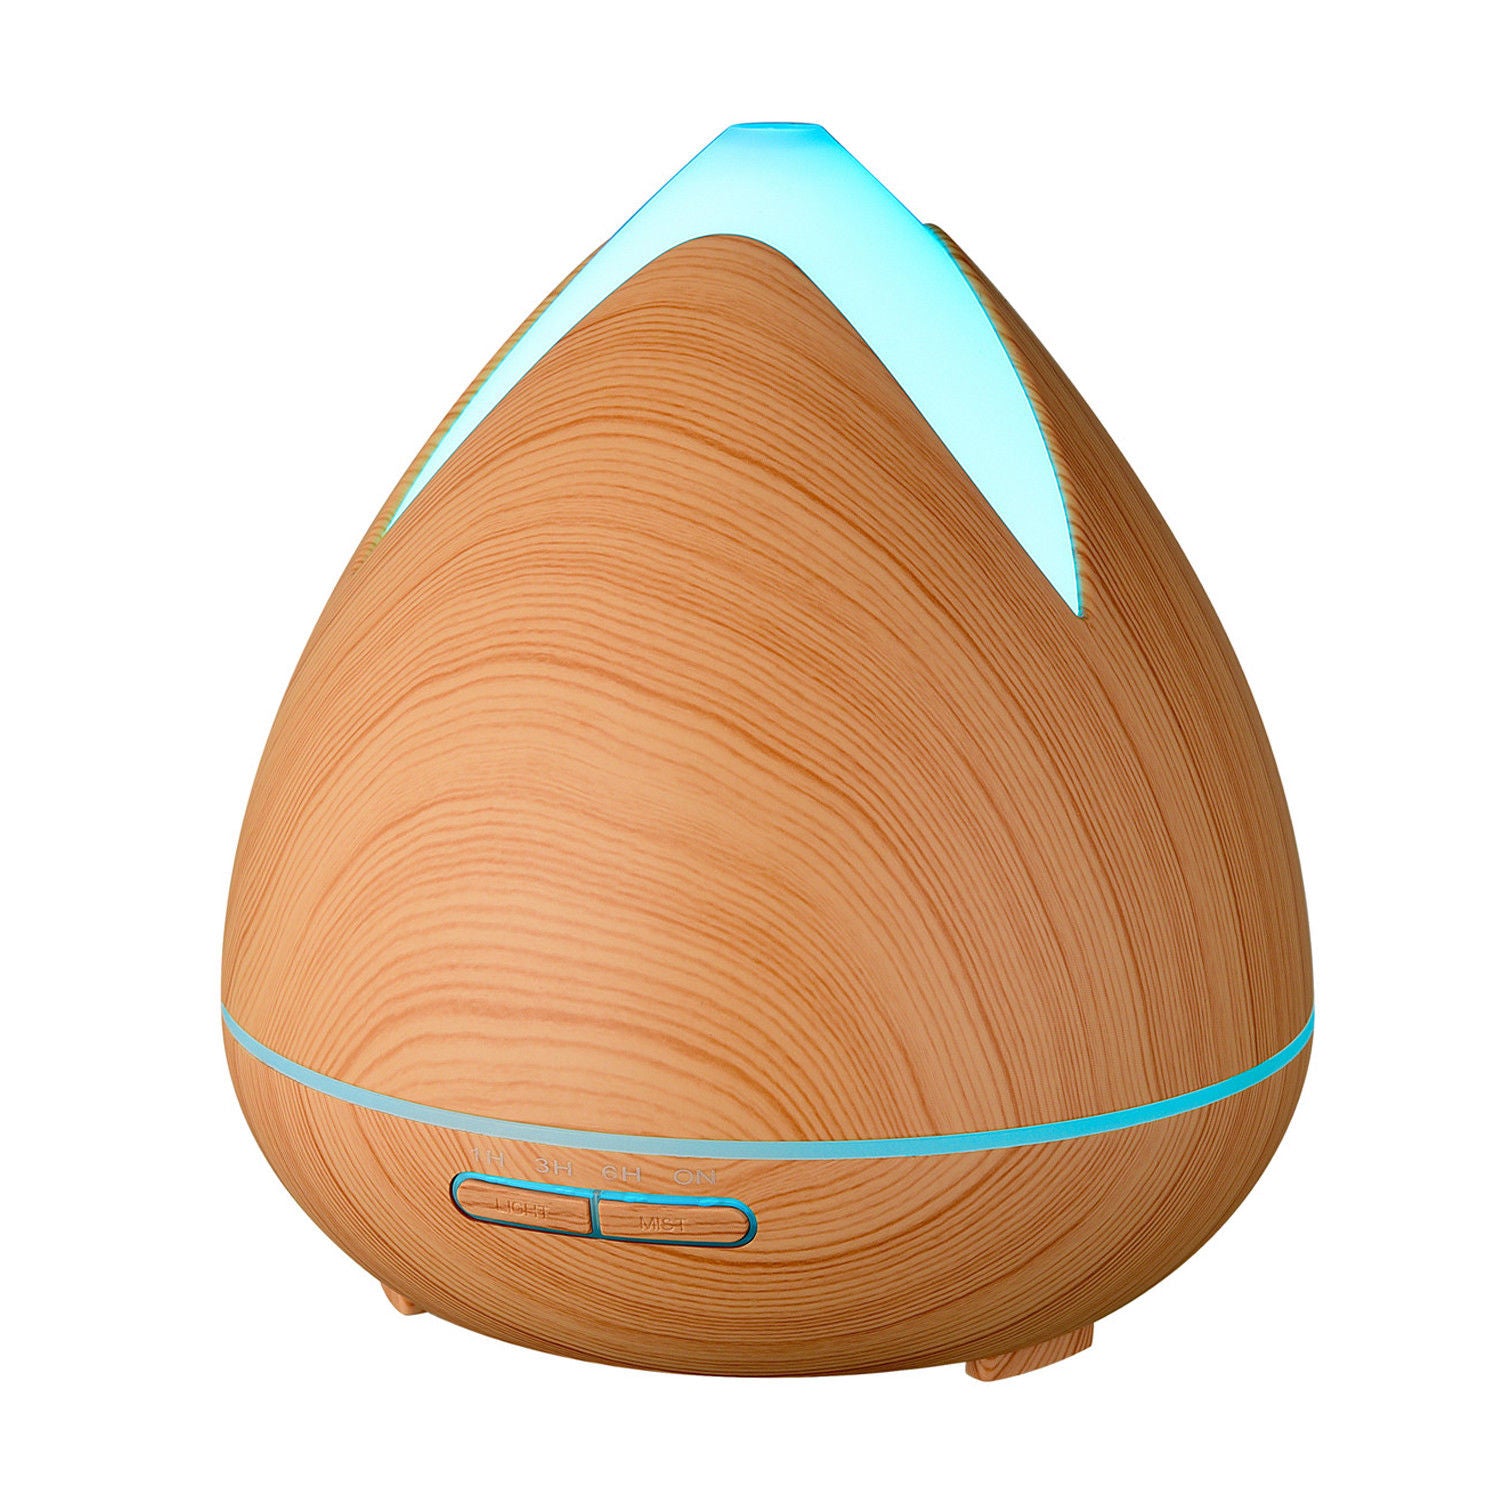 essential-oils-ultrasonic-aromatherapy-diffuser-air-humidifier-purify-400ml-light-wood